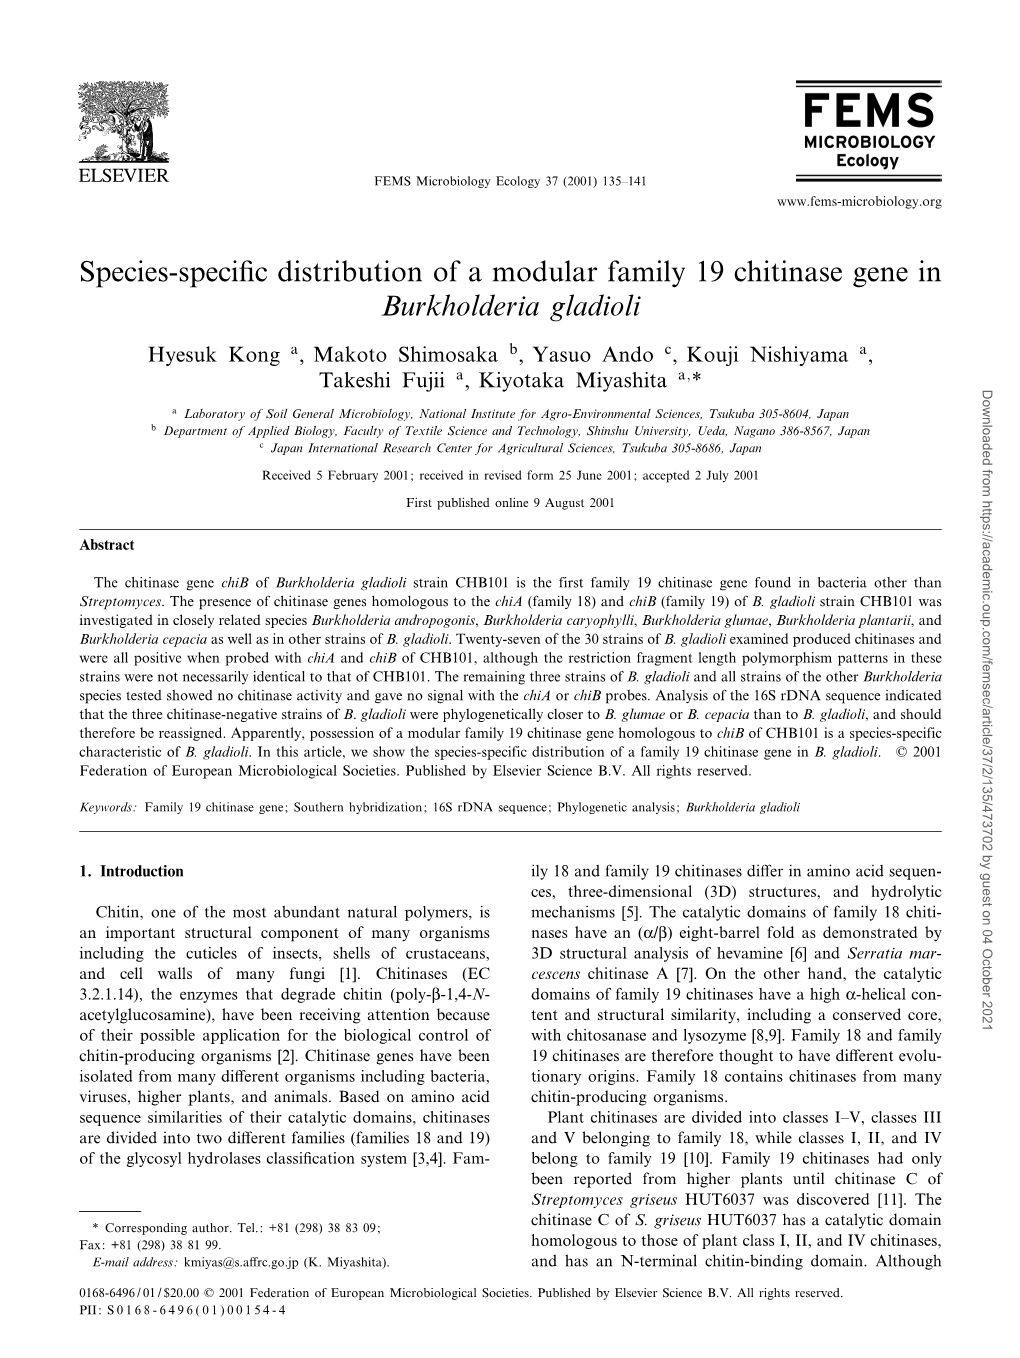 Species-Specific Distribution of a Modular Family 19 Chitinase Gene In